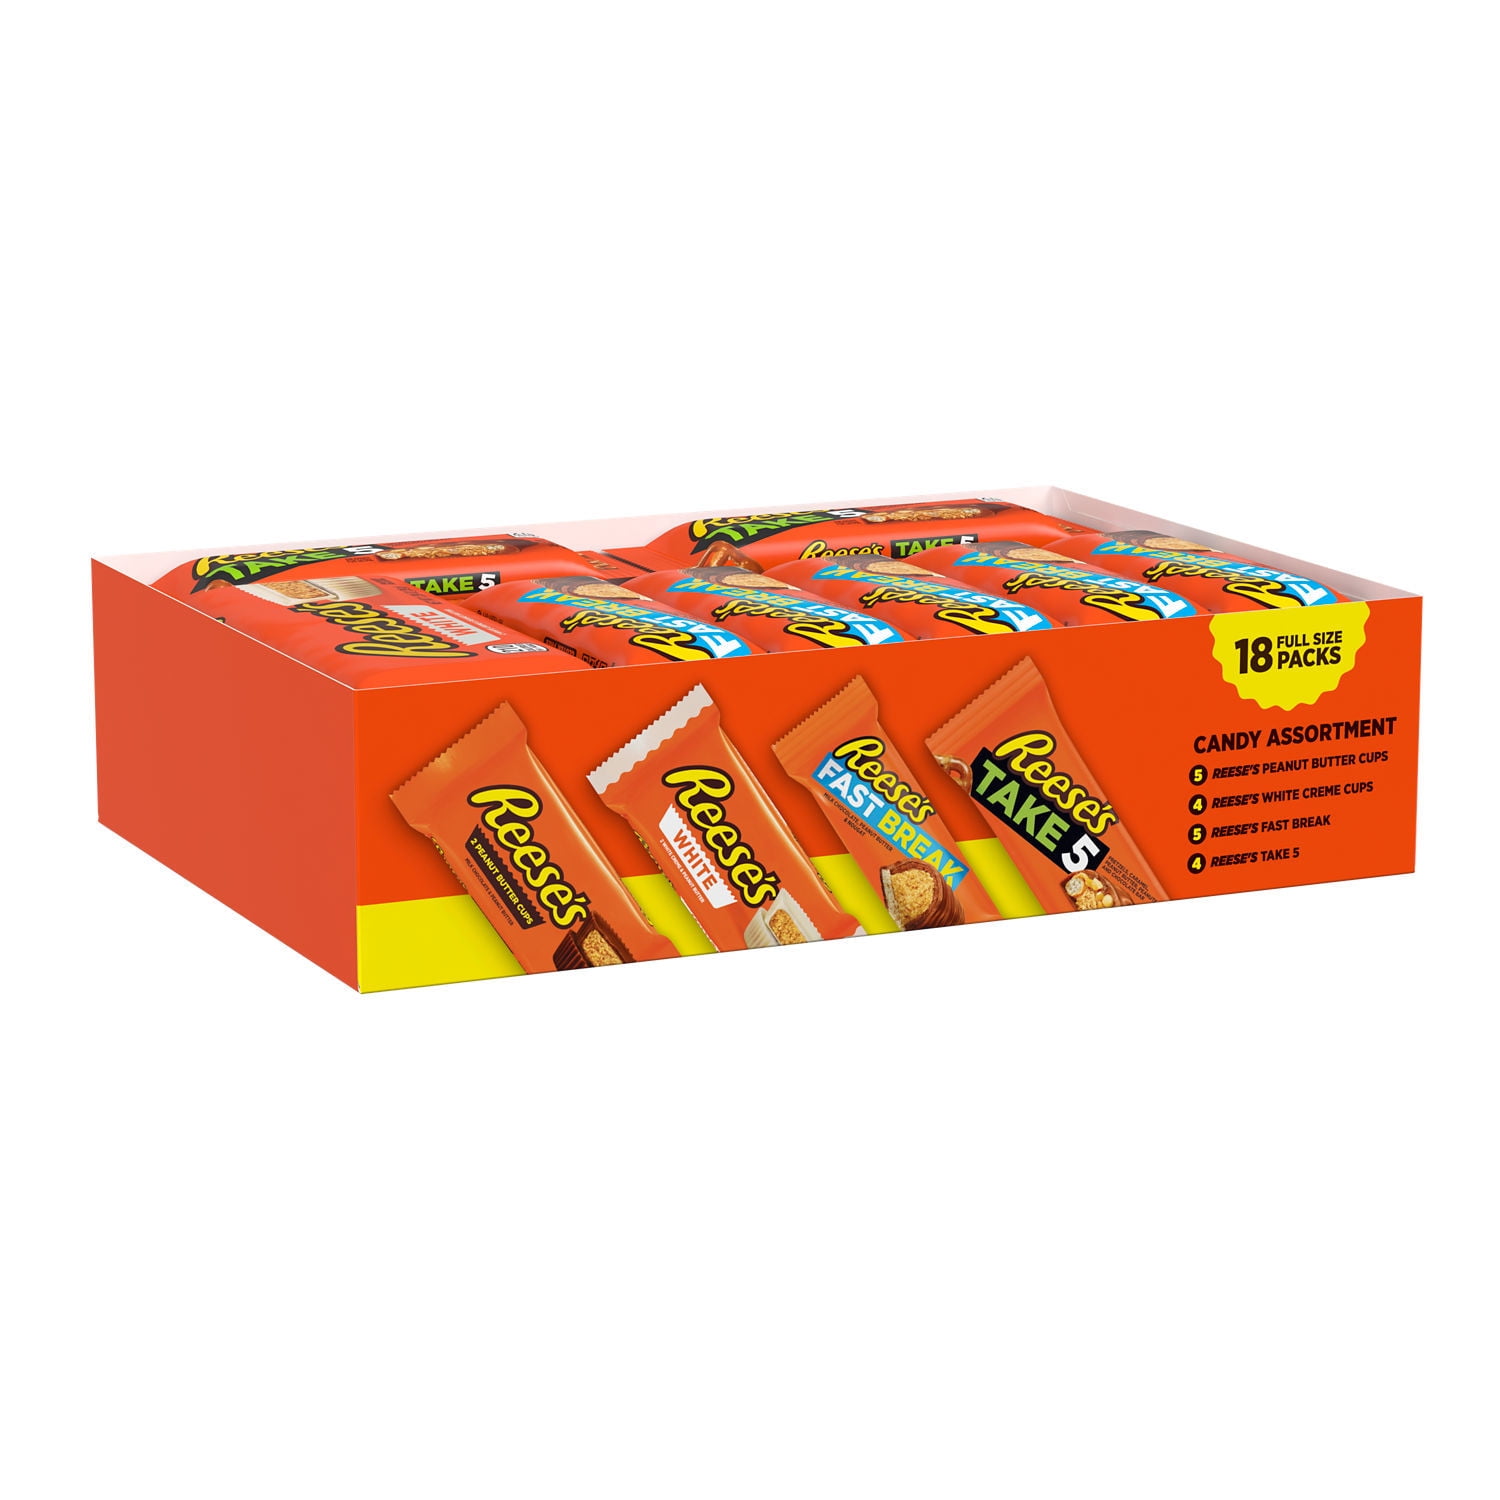 Reese's, Chocolate and White Creme Peanut Butter Assortment Candy, Individually Wrapped, 28.06 oz, Variety Pack (18 Ct)